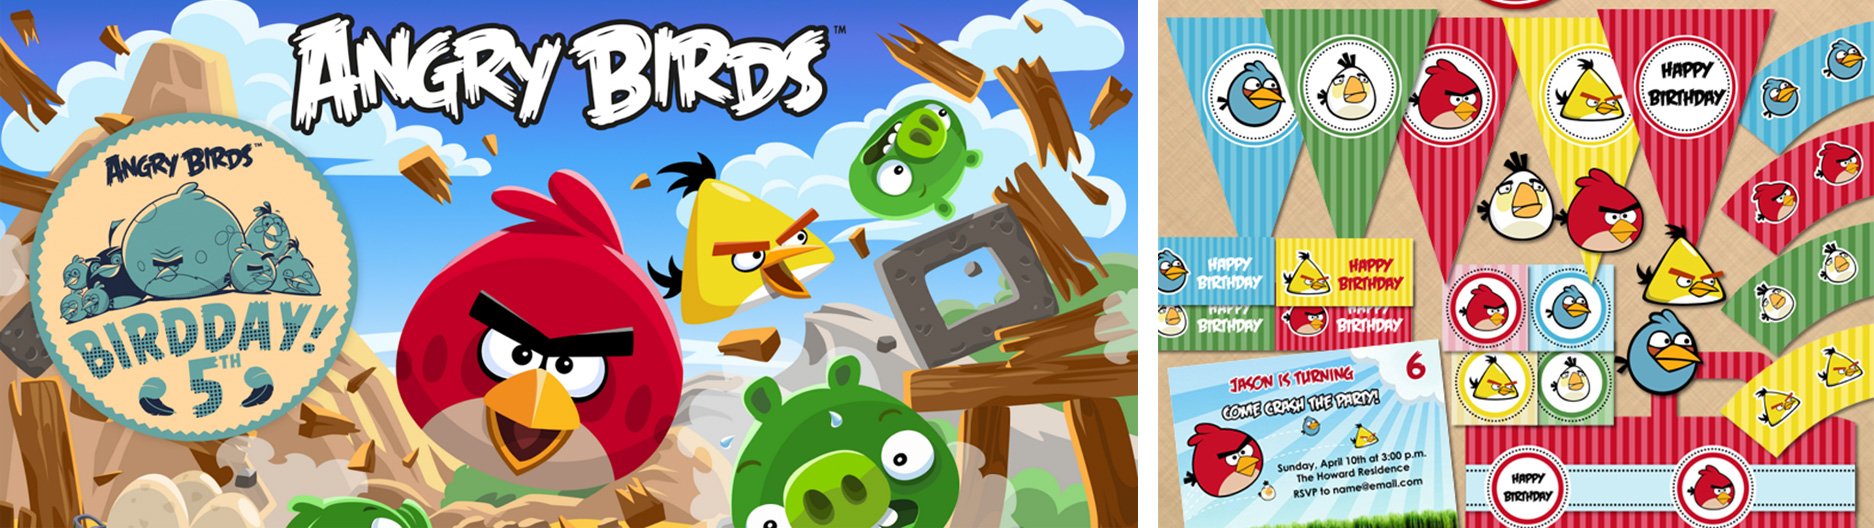 kit_imprimible_angry_birds_gratis_free